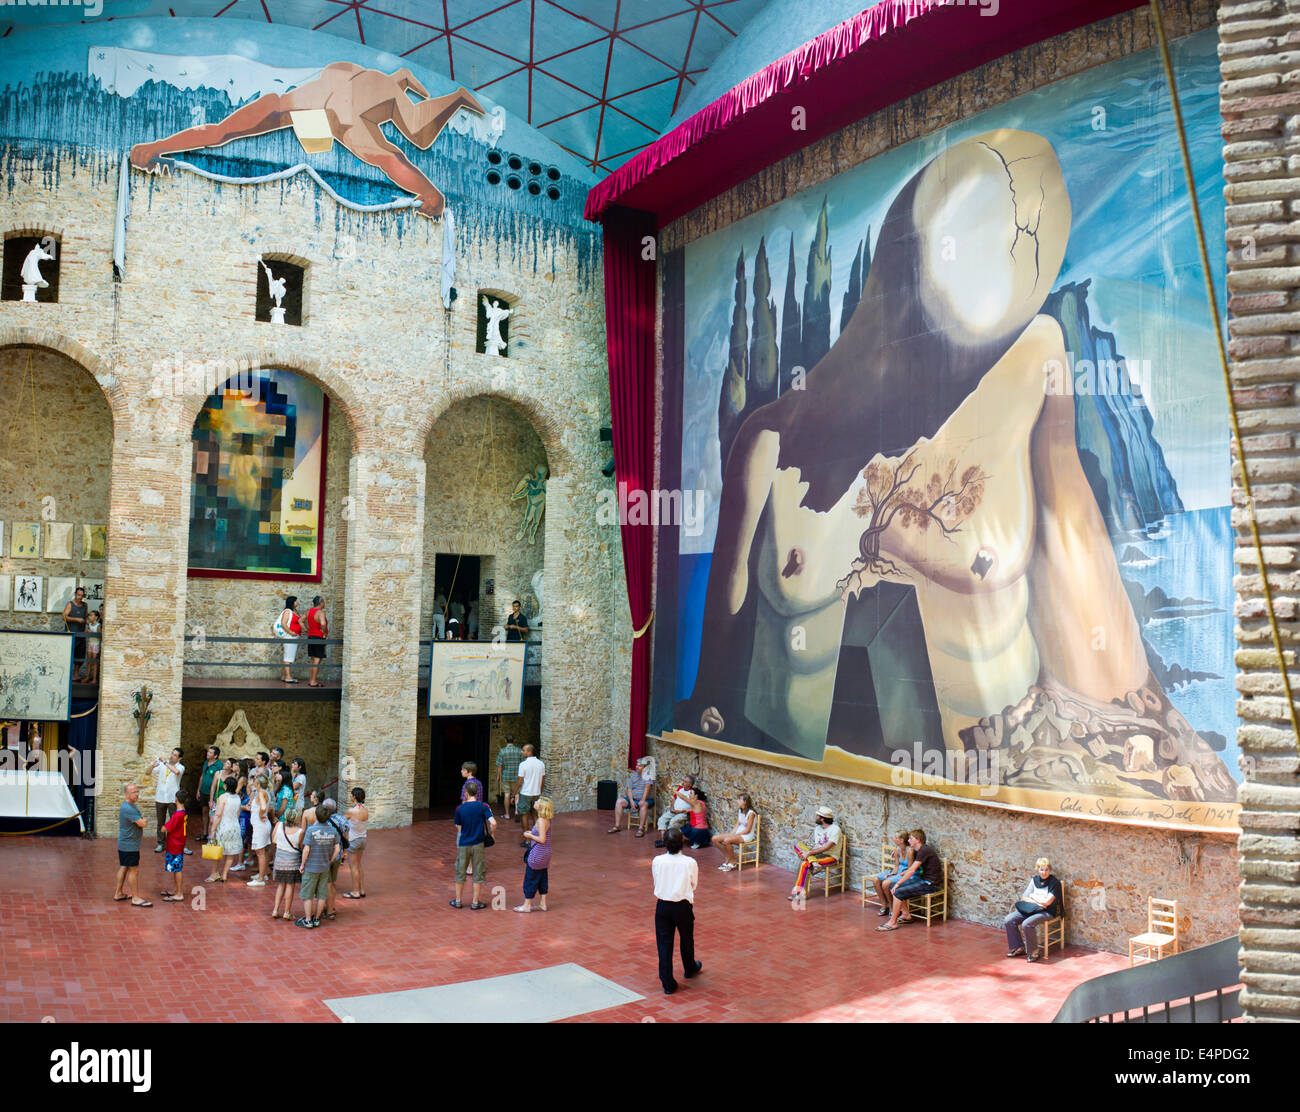 Painting in the Dalí Theatre and Museum, Figueres, Catalonia, Spain Stock Photo